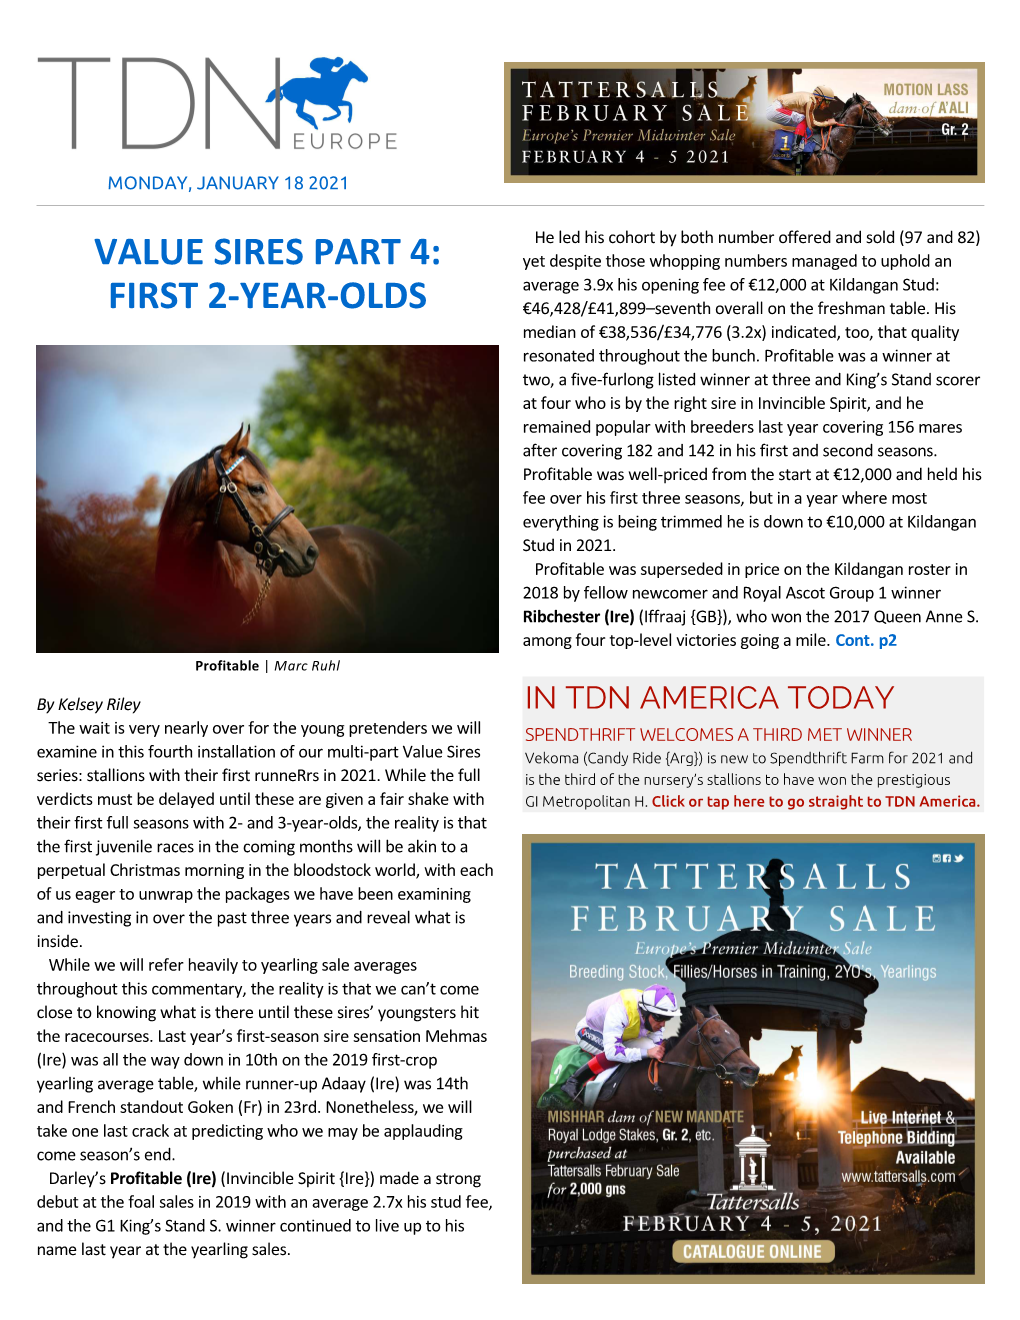 Value Sires Part 4: First 2-Year-Olds